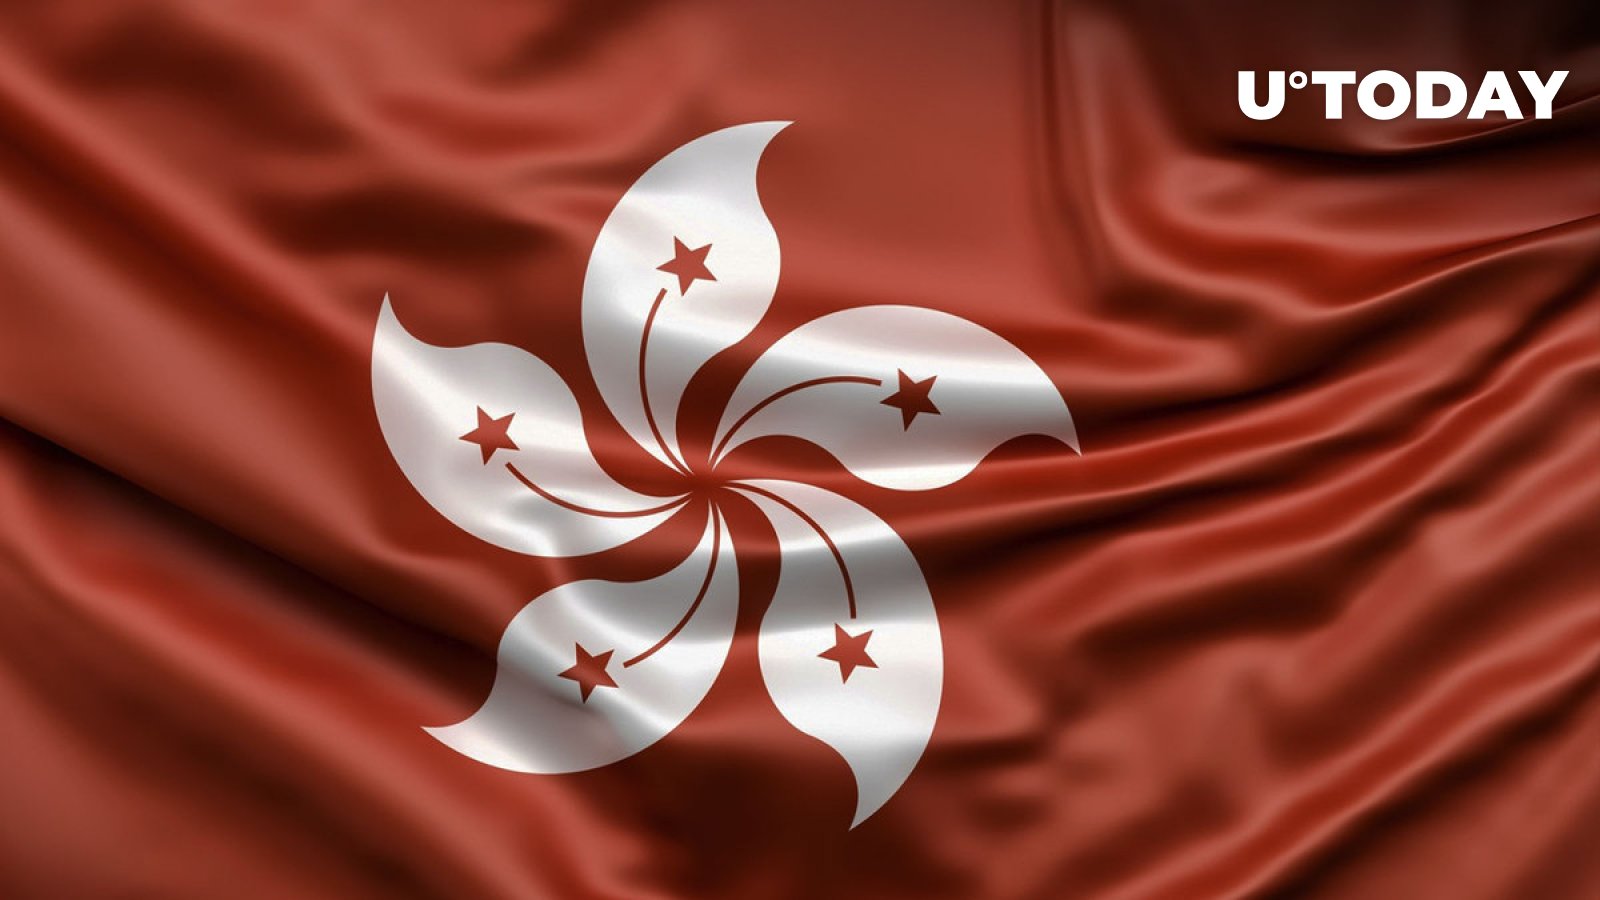 crypto-trading-hub-prospects-in-hong-kong-indicated-by-local-regulator